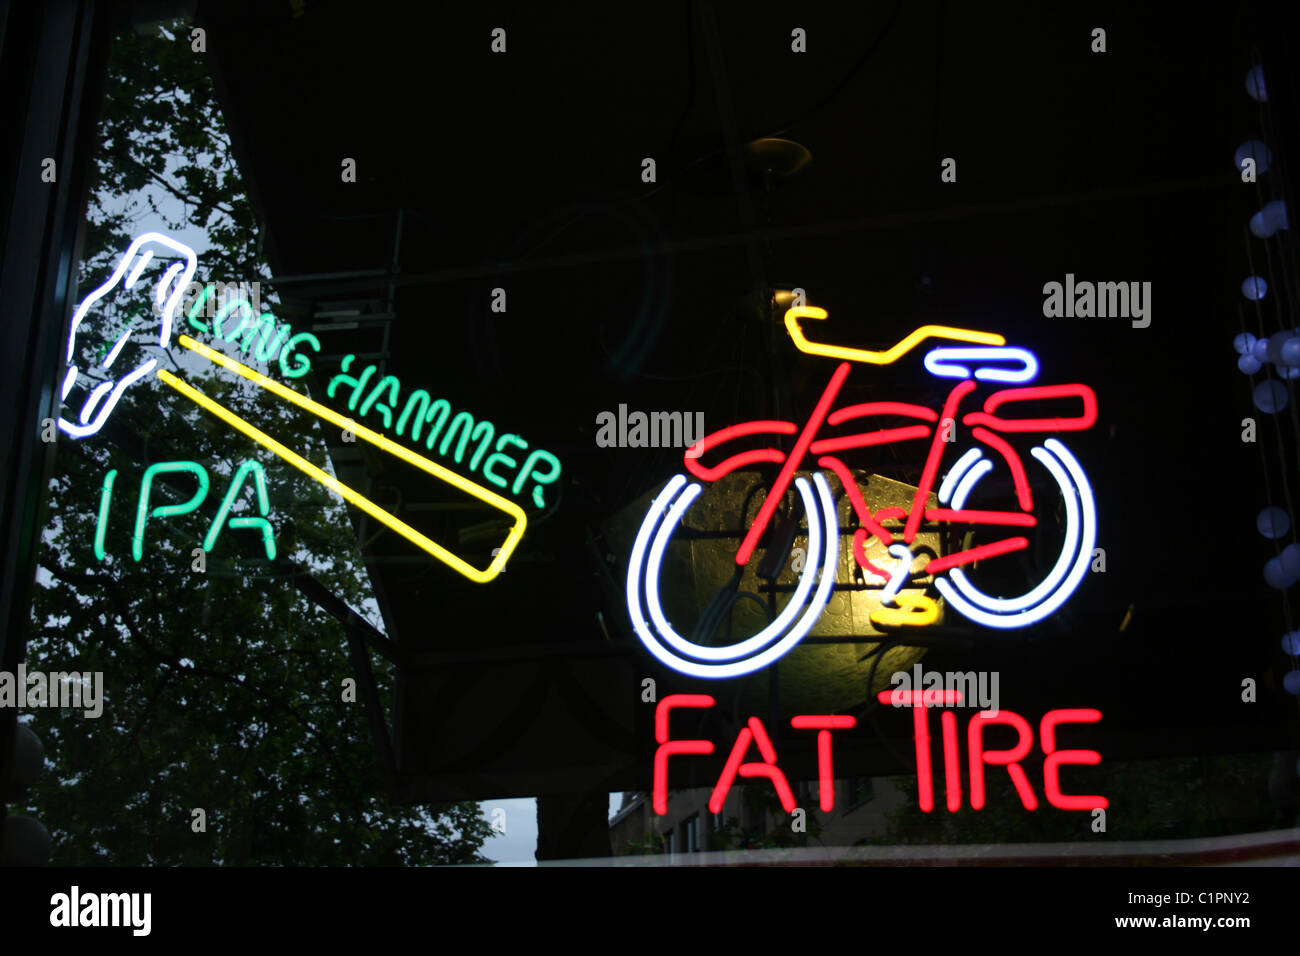 Seattle, USA. Two neon beer signs, promoting beer brands; Long hammer IPA and Fat Tire. Stock Photo